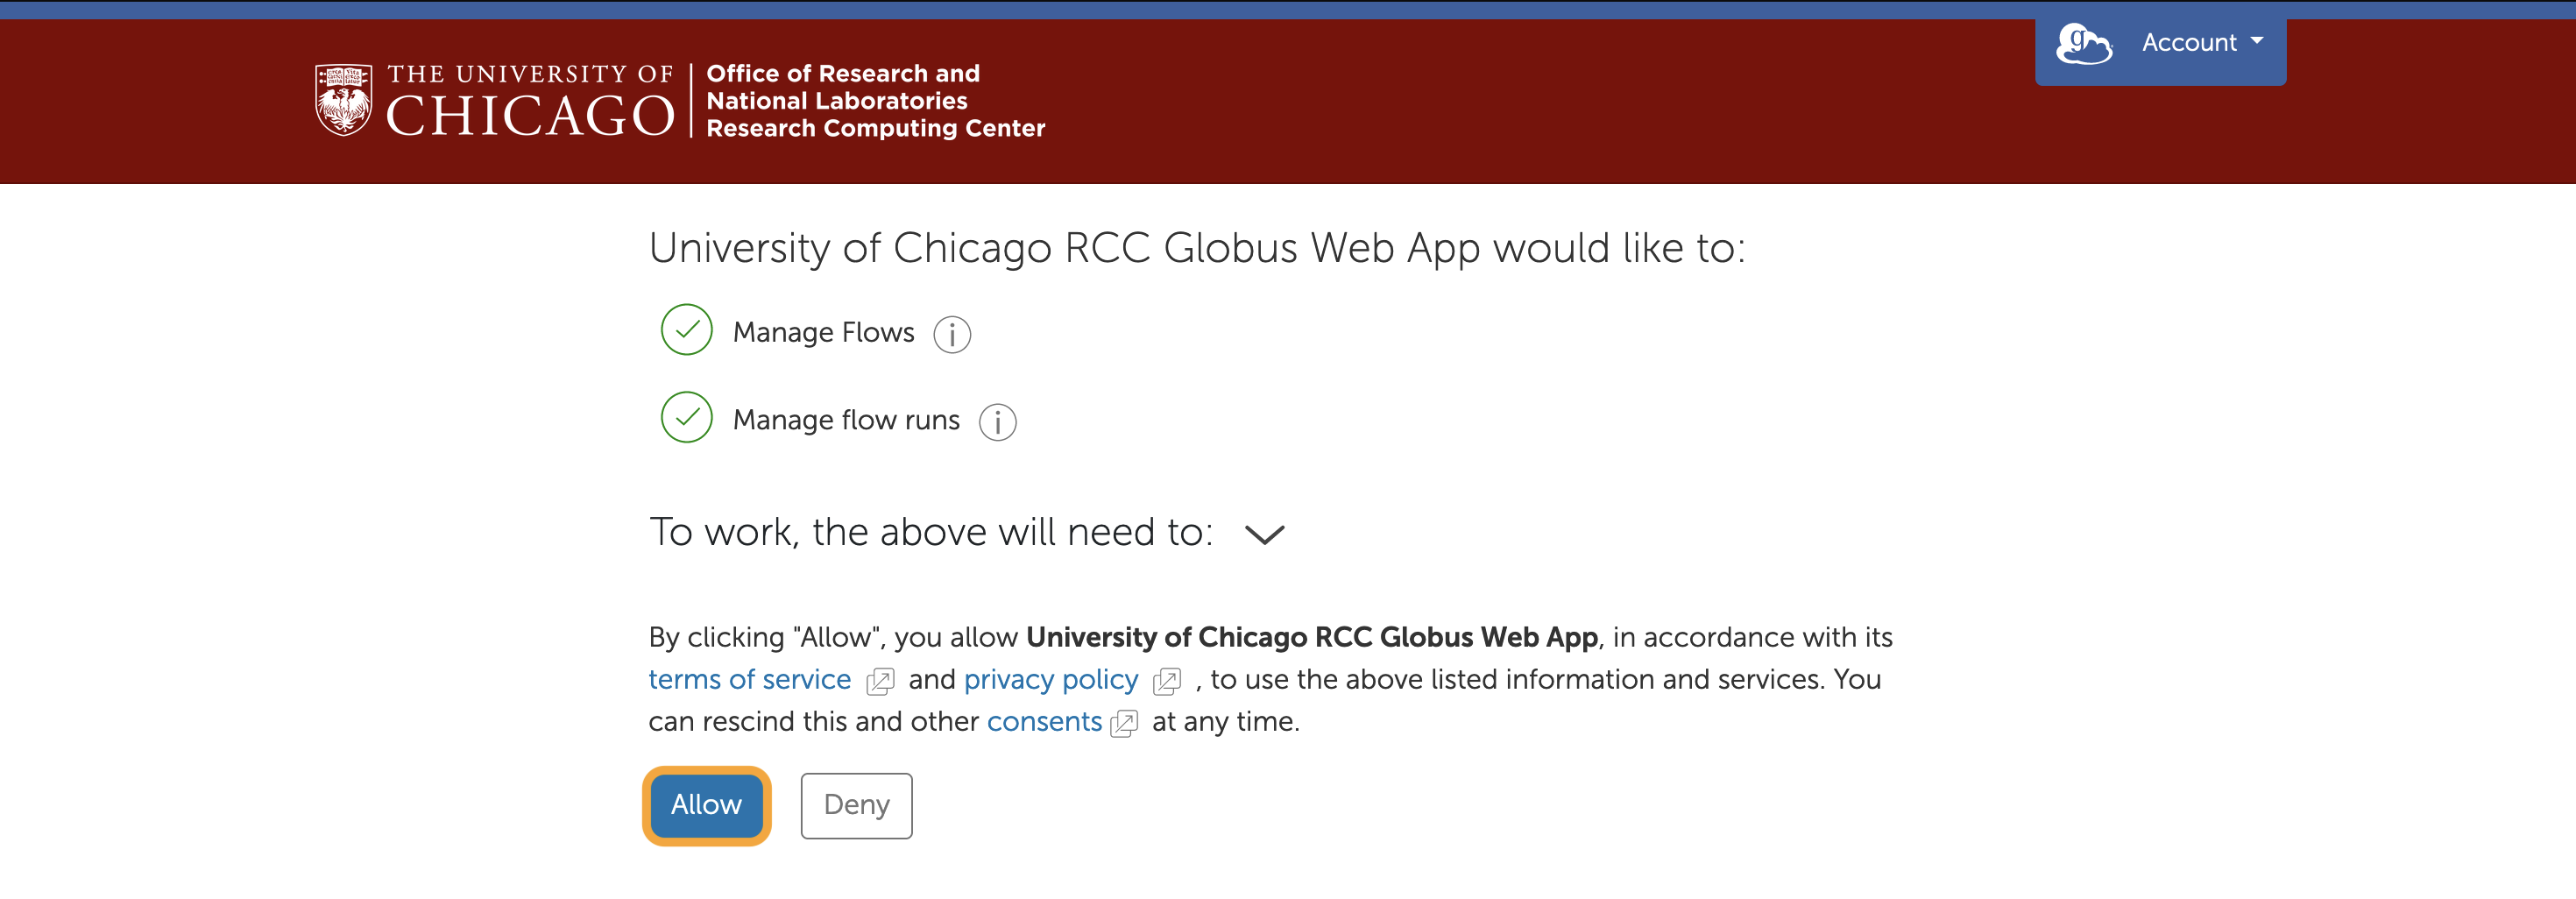 Web page titled "University of Chicago RCC Globus Web App would like to Manage Flows" with "Allow" highlighted.